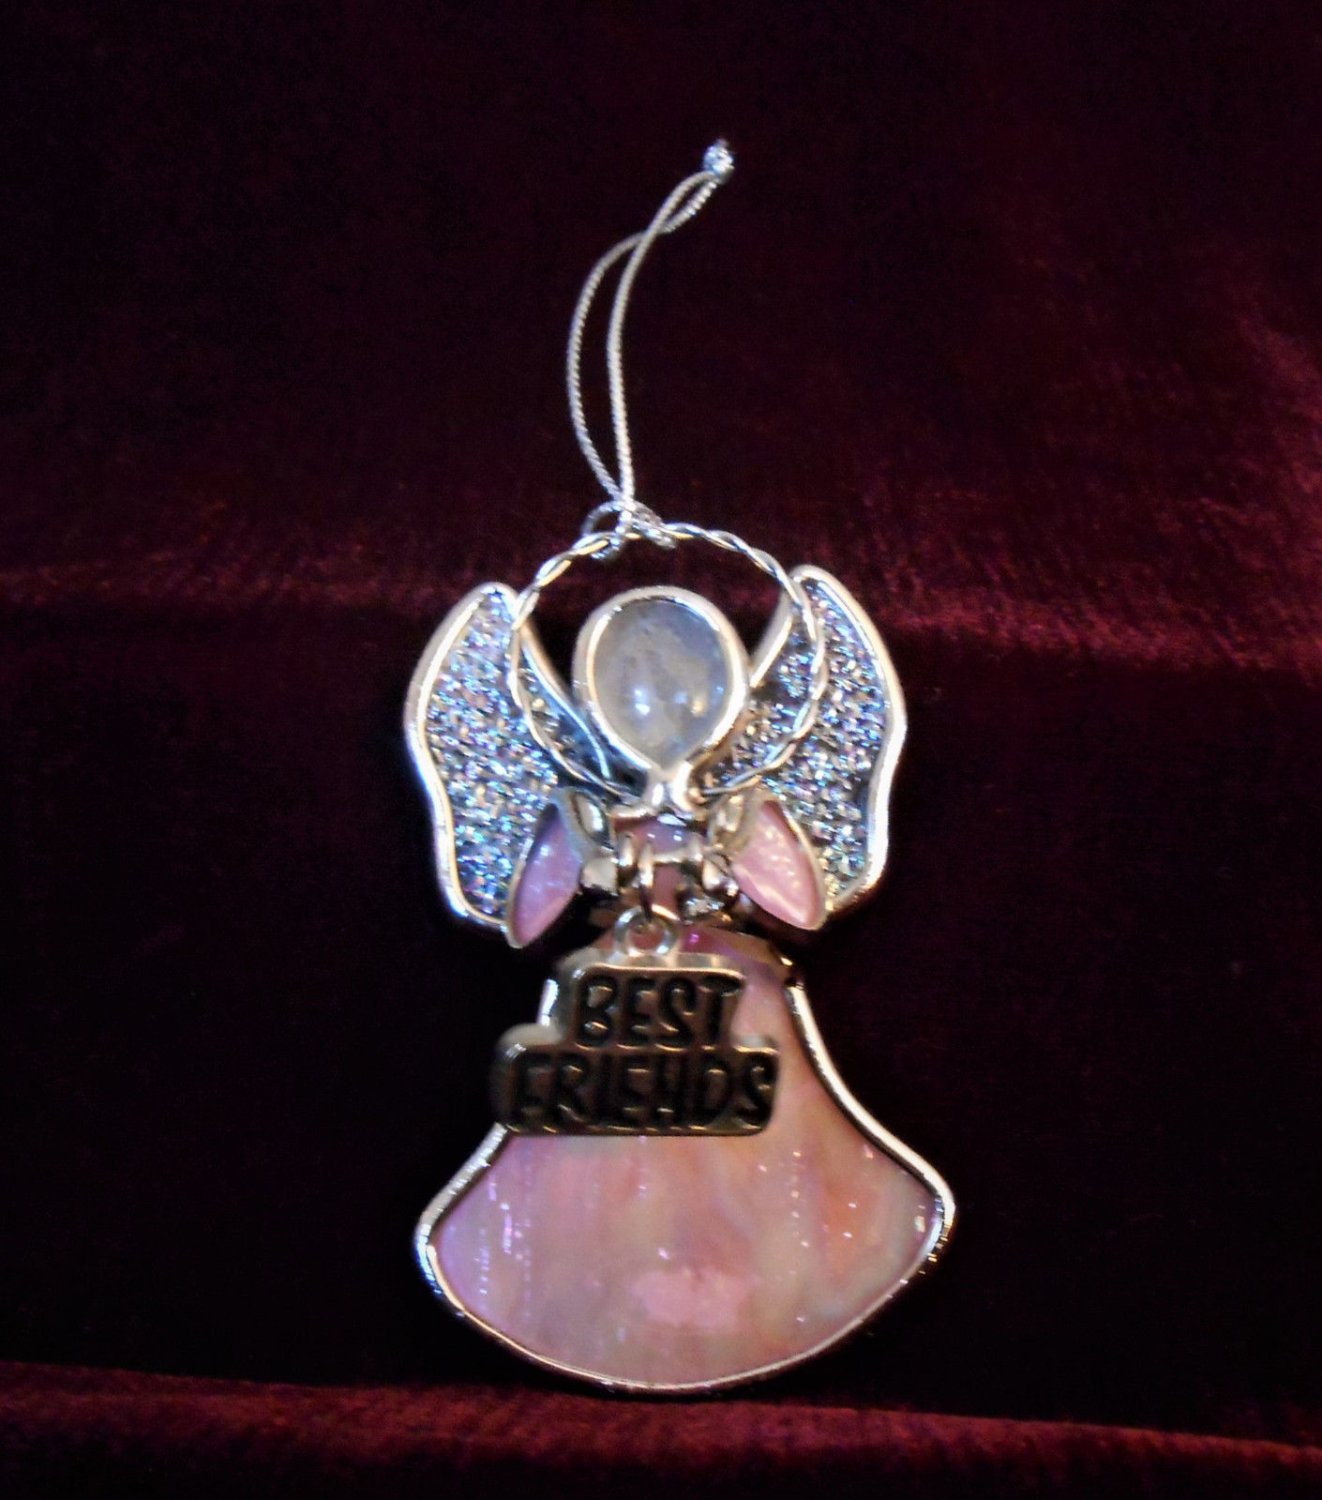 Ganz Best Frends Stained Glass Christmas Tree Ornament Pink Angel